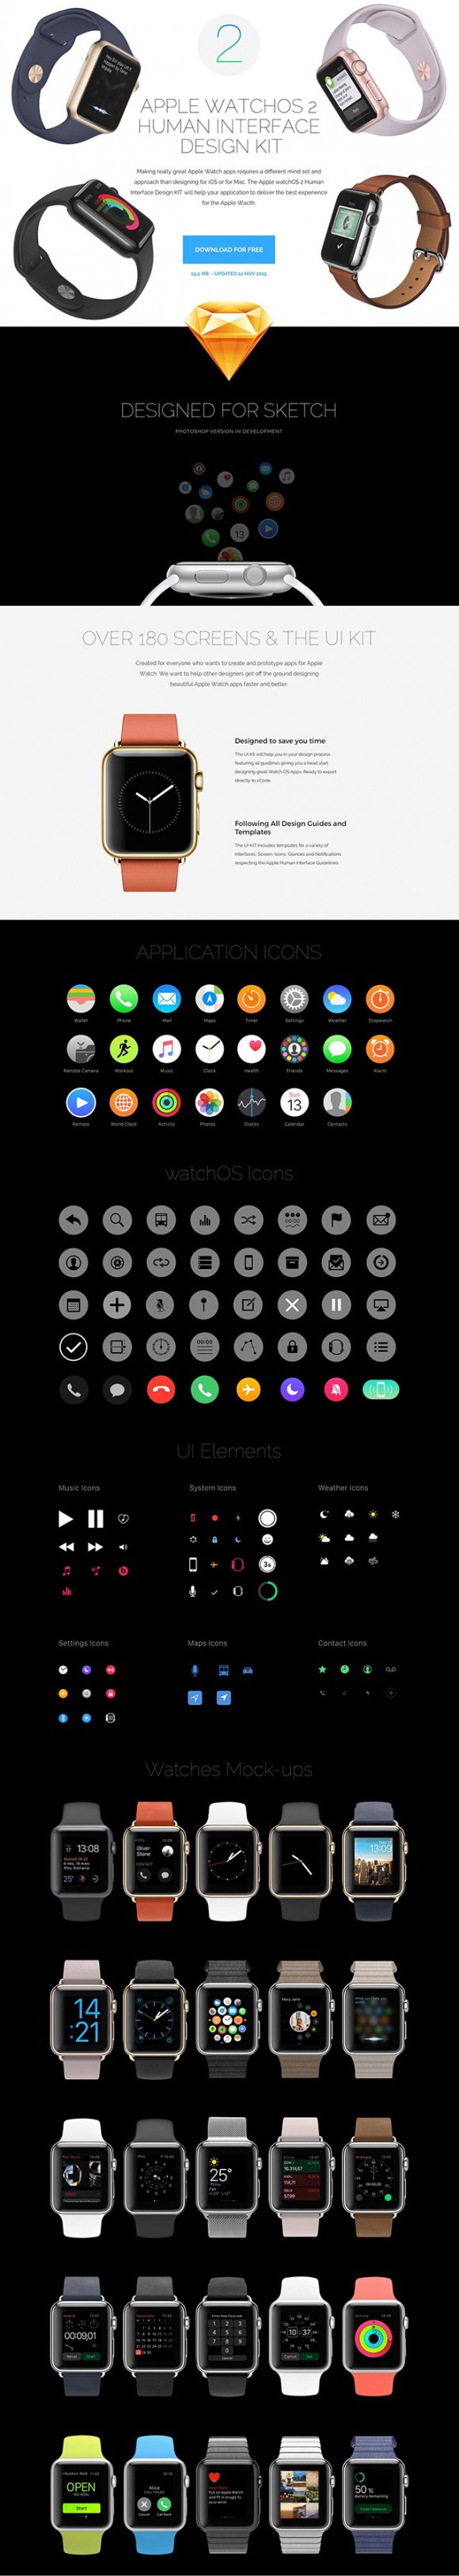 WatchOS 2 full preview